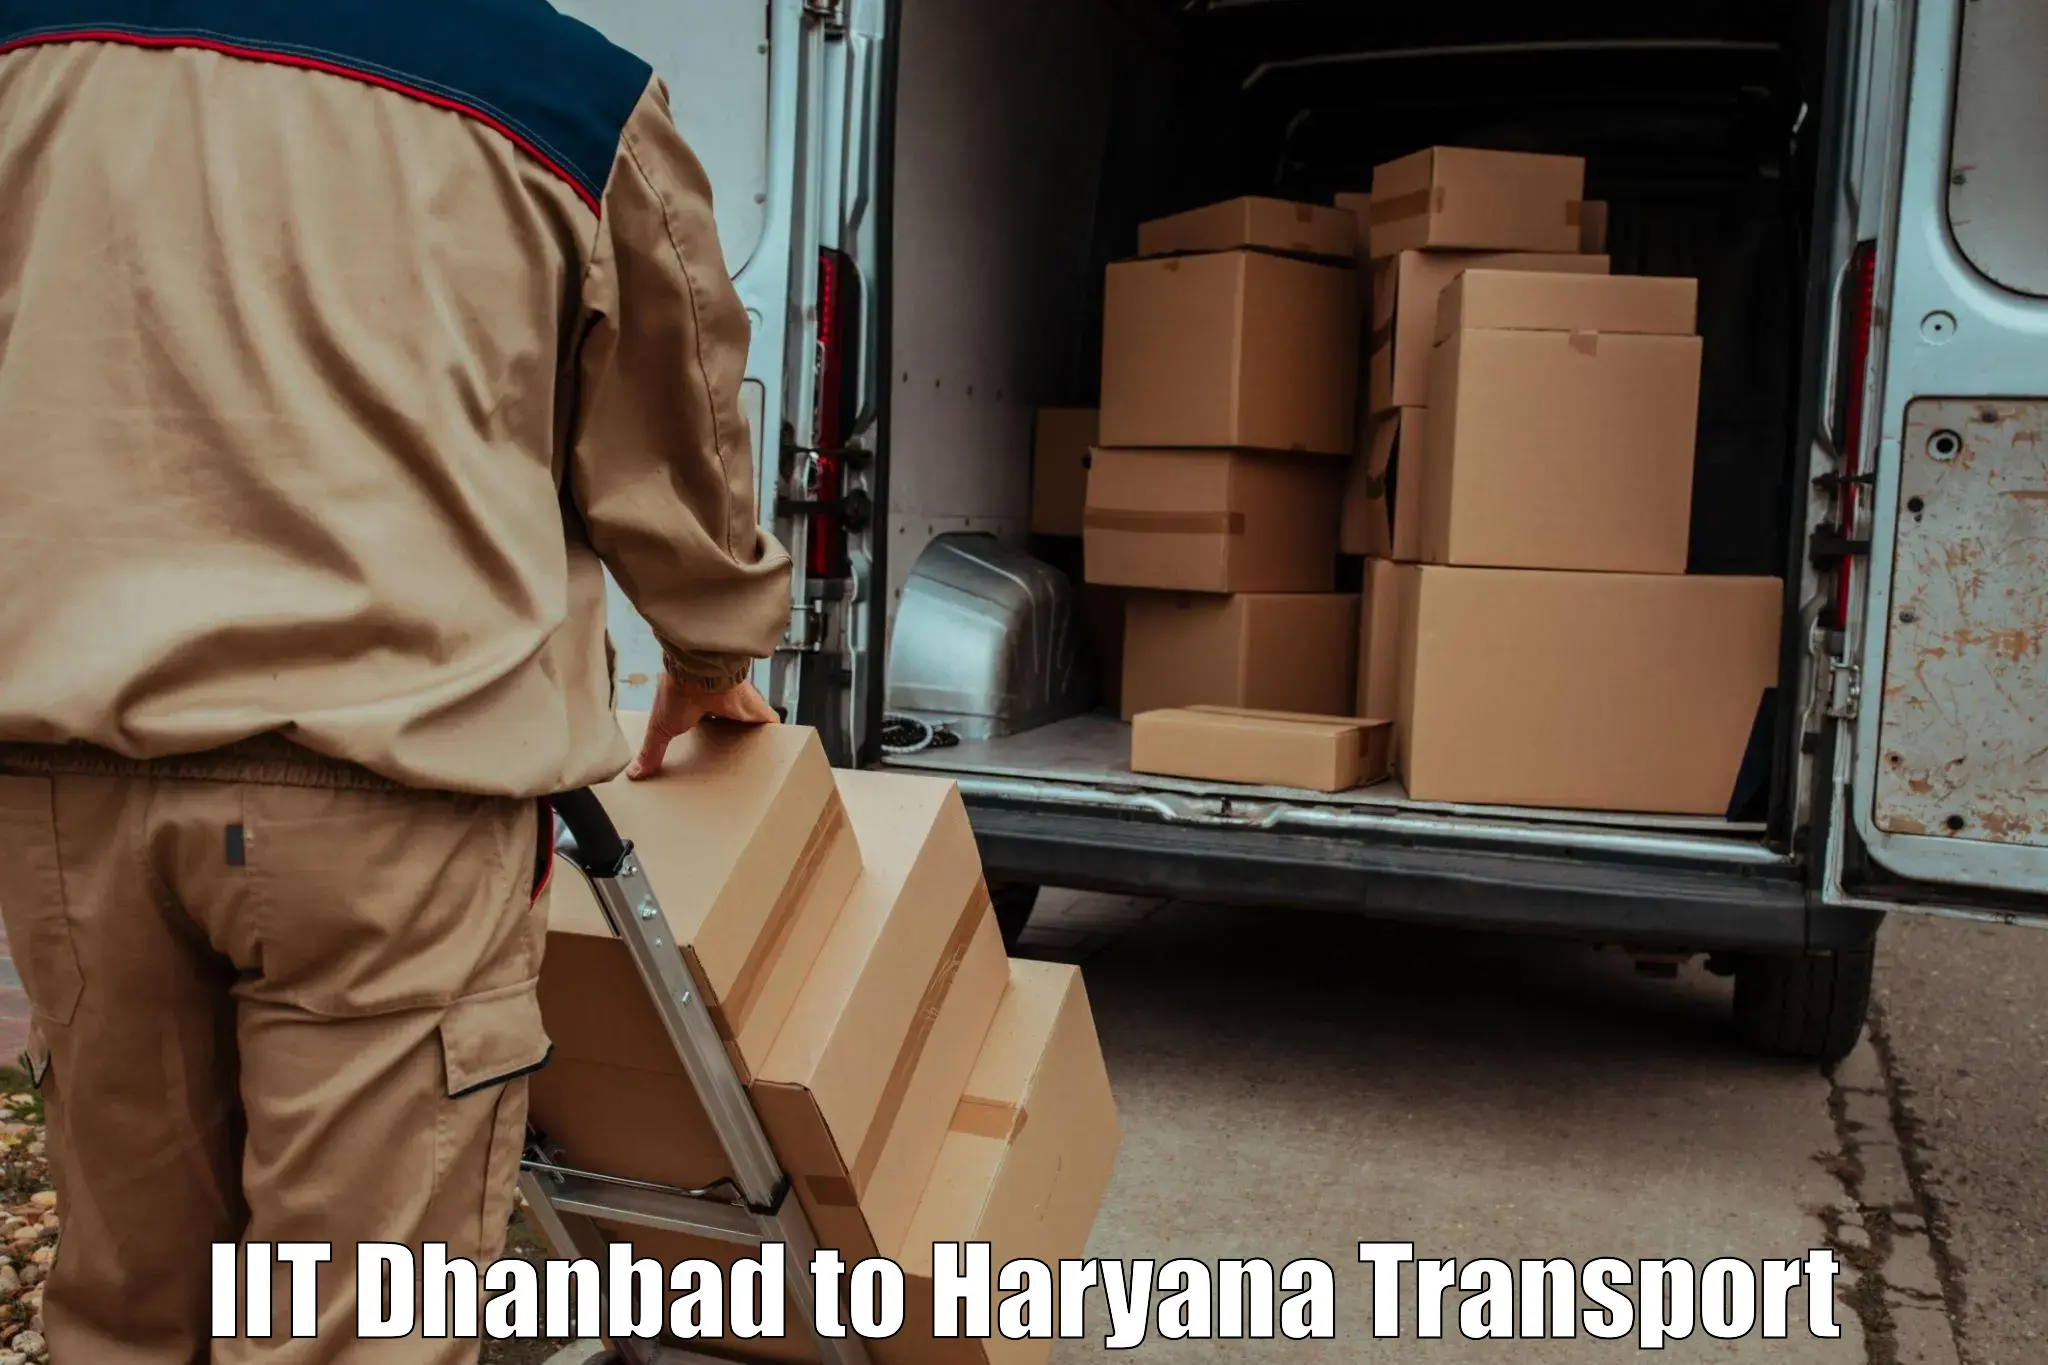 Daily transport service IIT Dhanbad to Narnaul